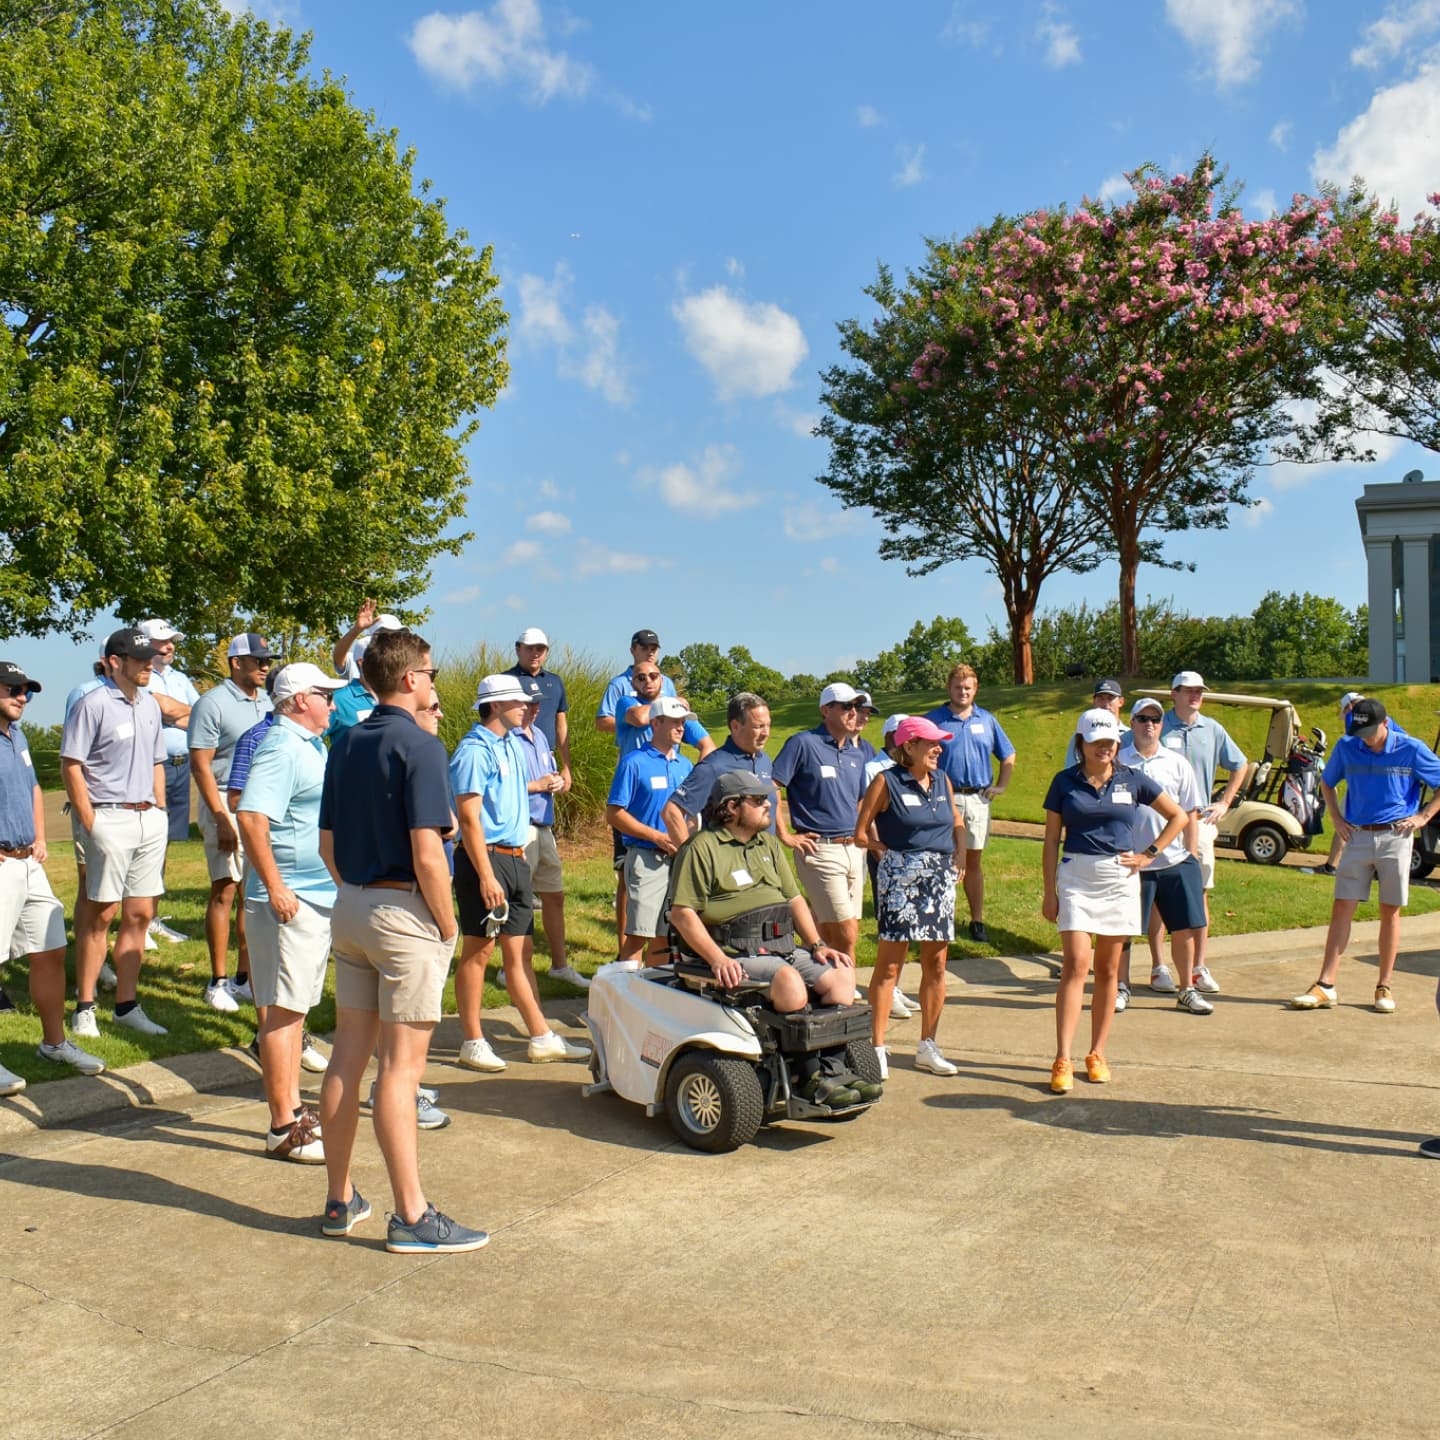 A large group gathered around a golfer in an accessibile golf cart.